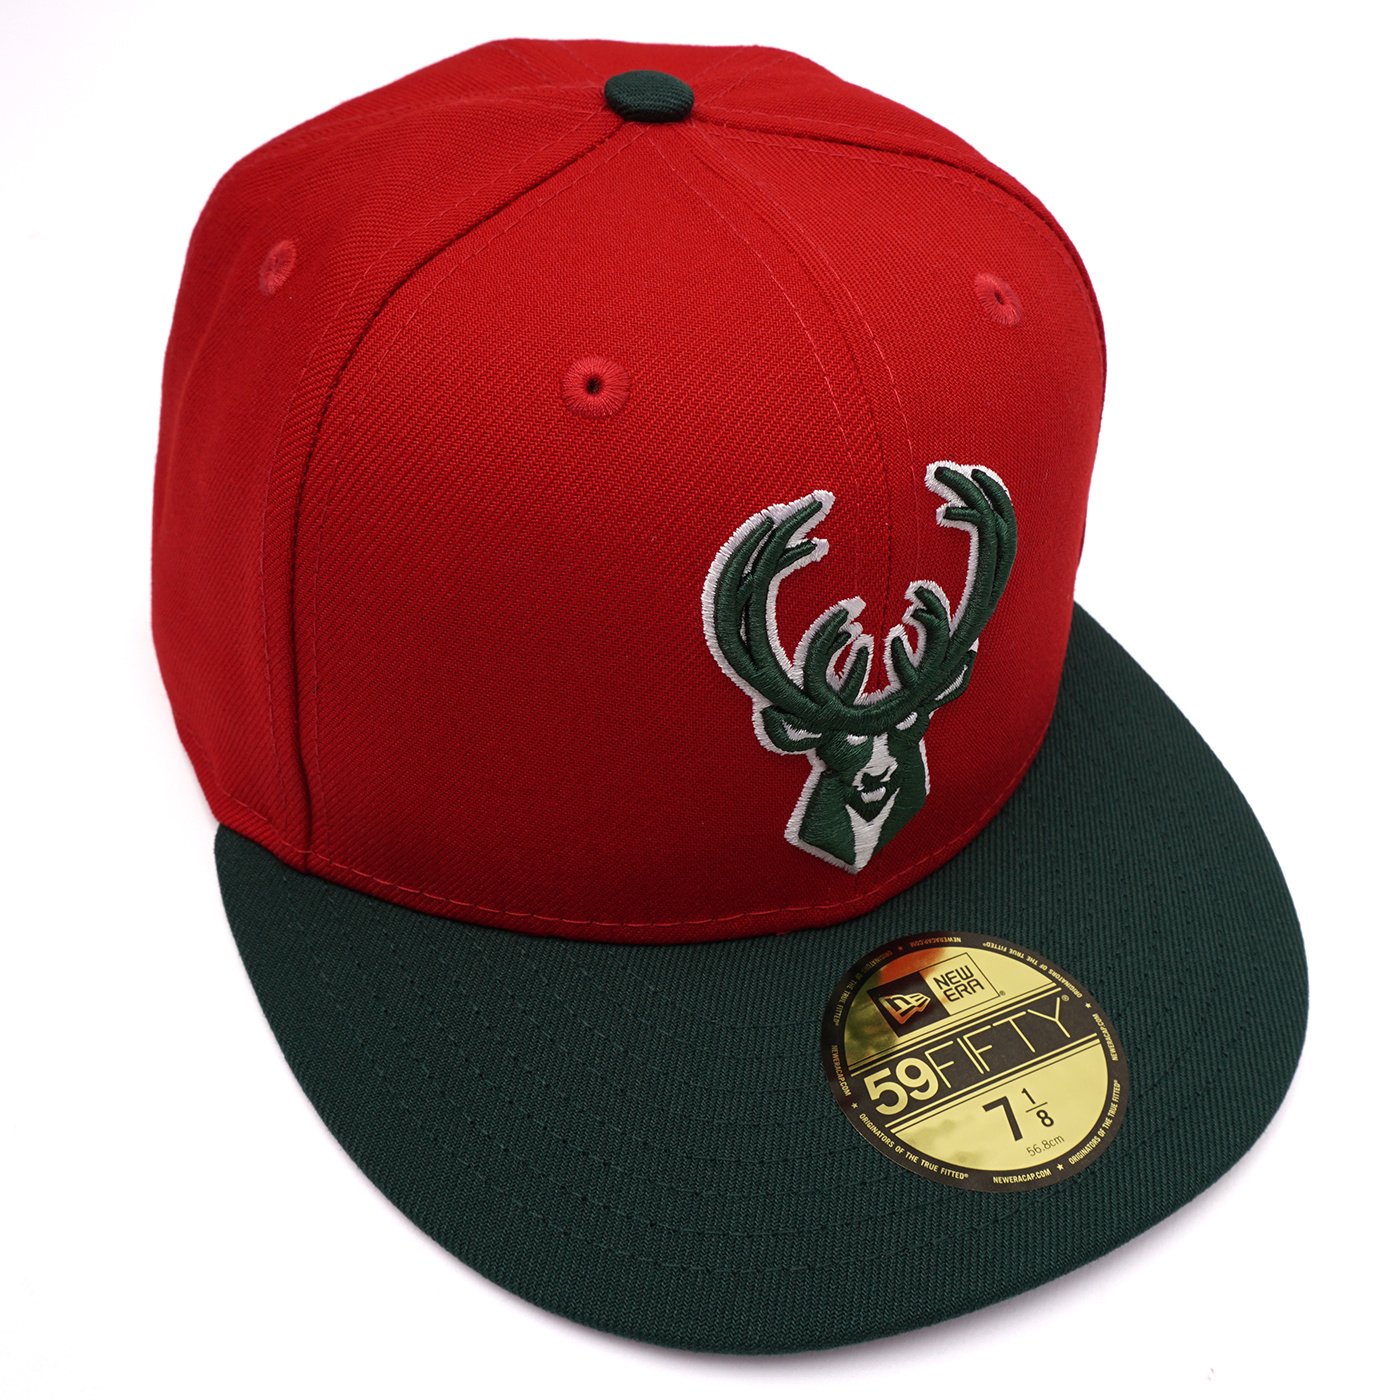 New Era 59FIFTY Arch Green Milwaukee Bucks Fitted Hat / 7 1/4